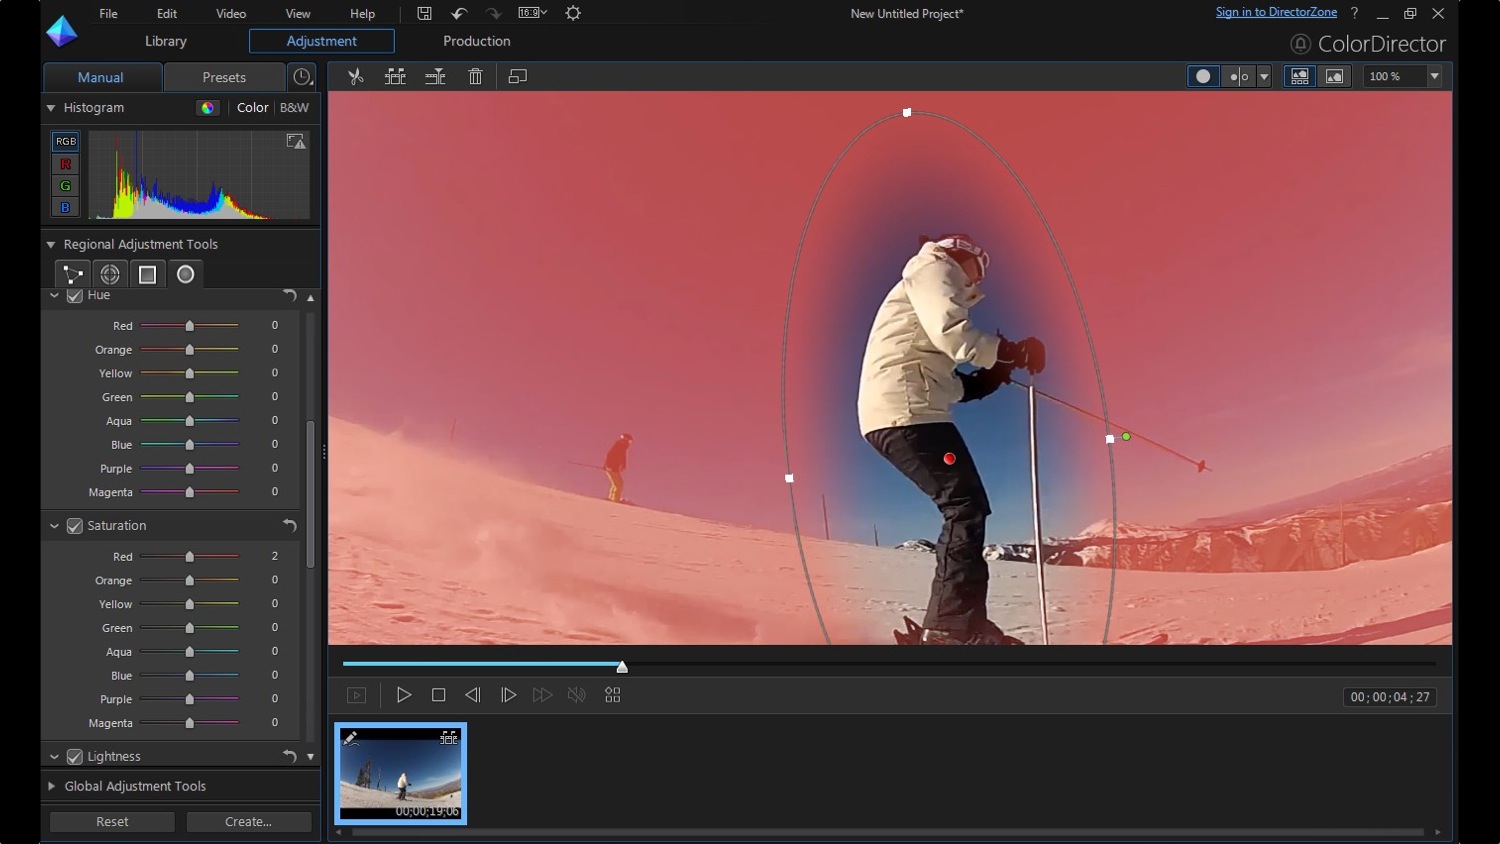 cyberlink director suite 4s new features include action cam video editing radial mask